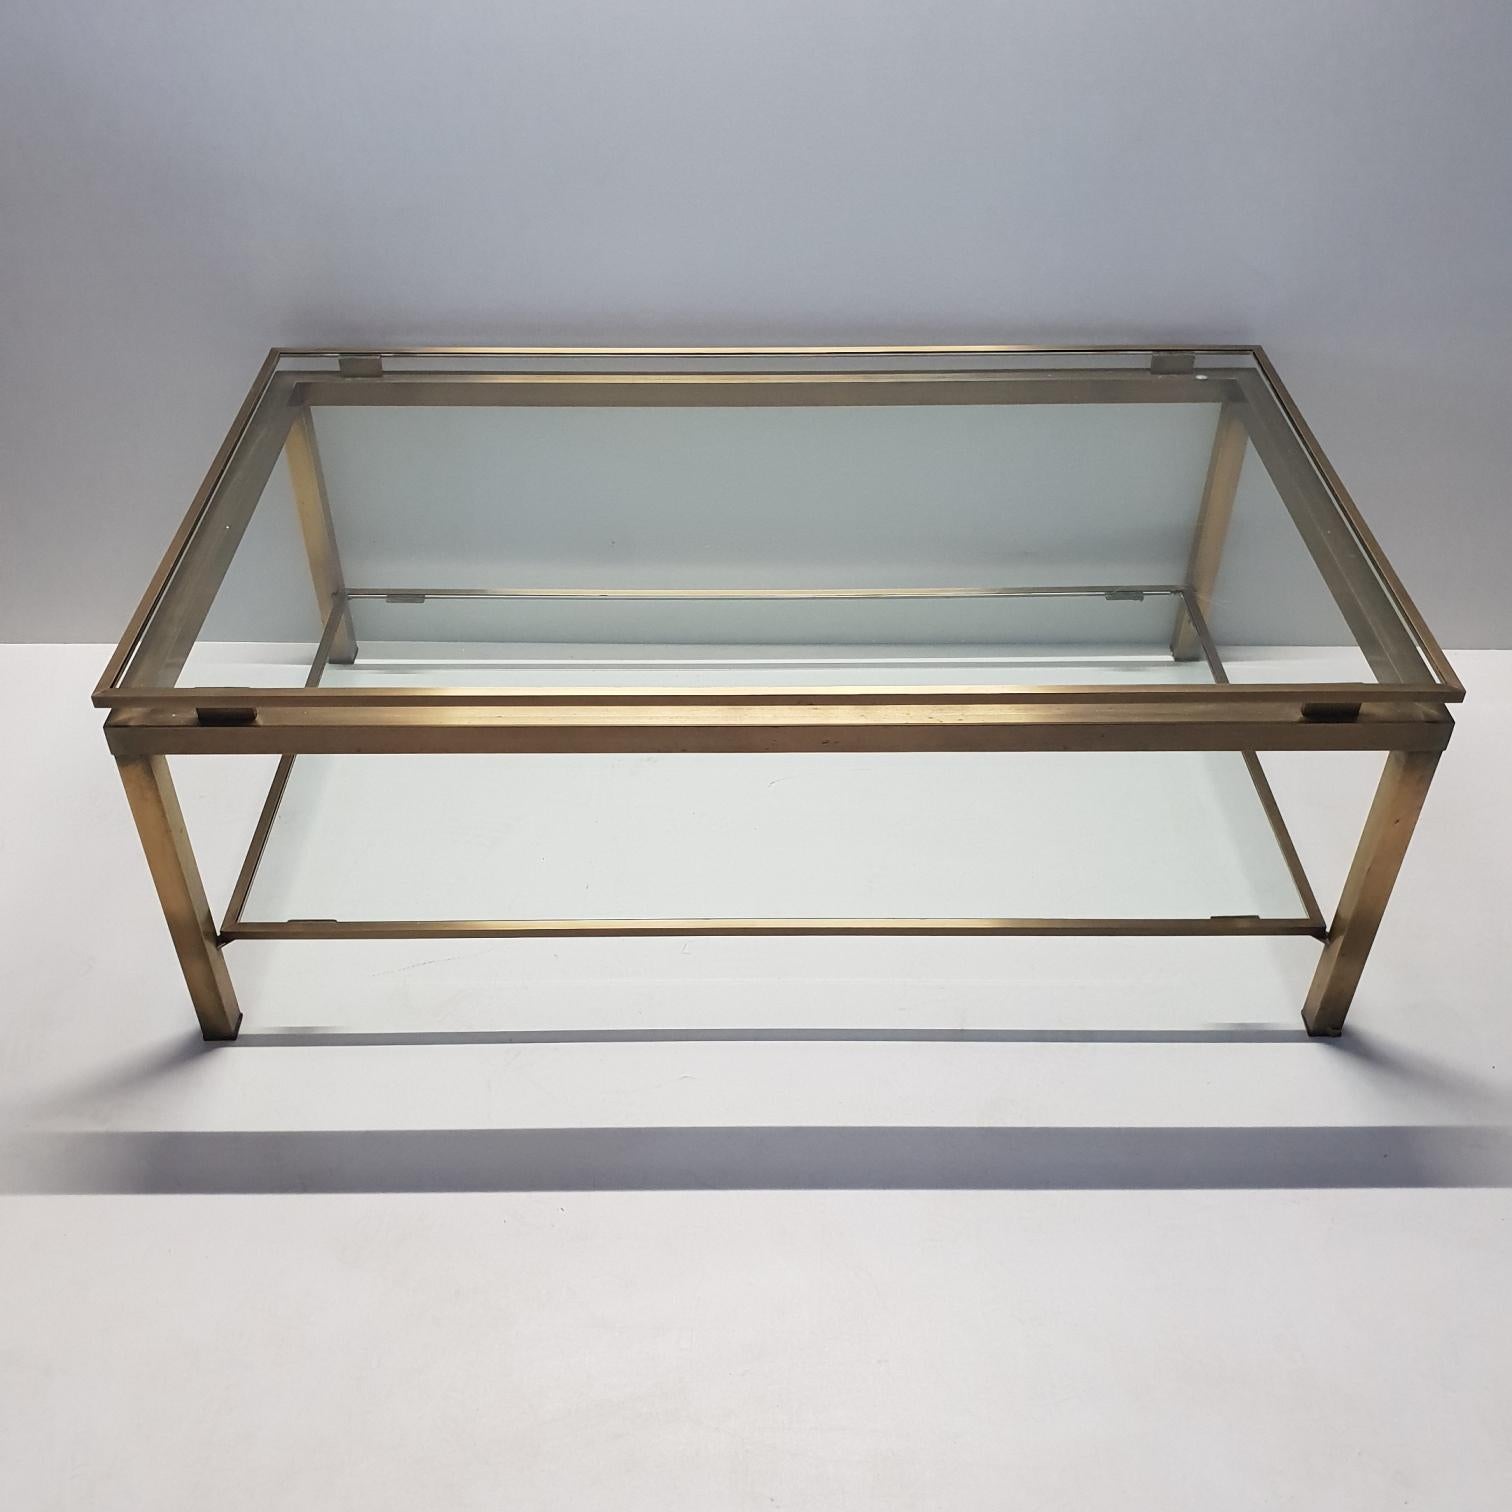 Brass rectangular 2-tiers coffee table by Maison Jansen, 1970s.
With a brushed brass frame.